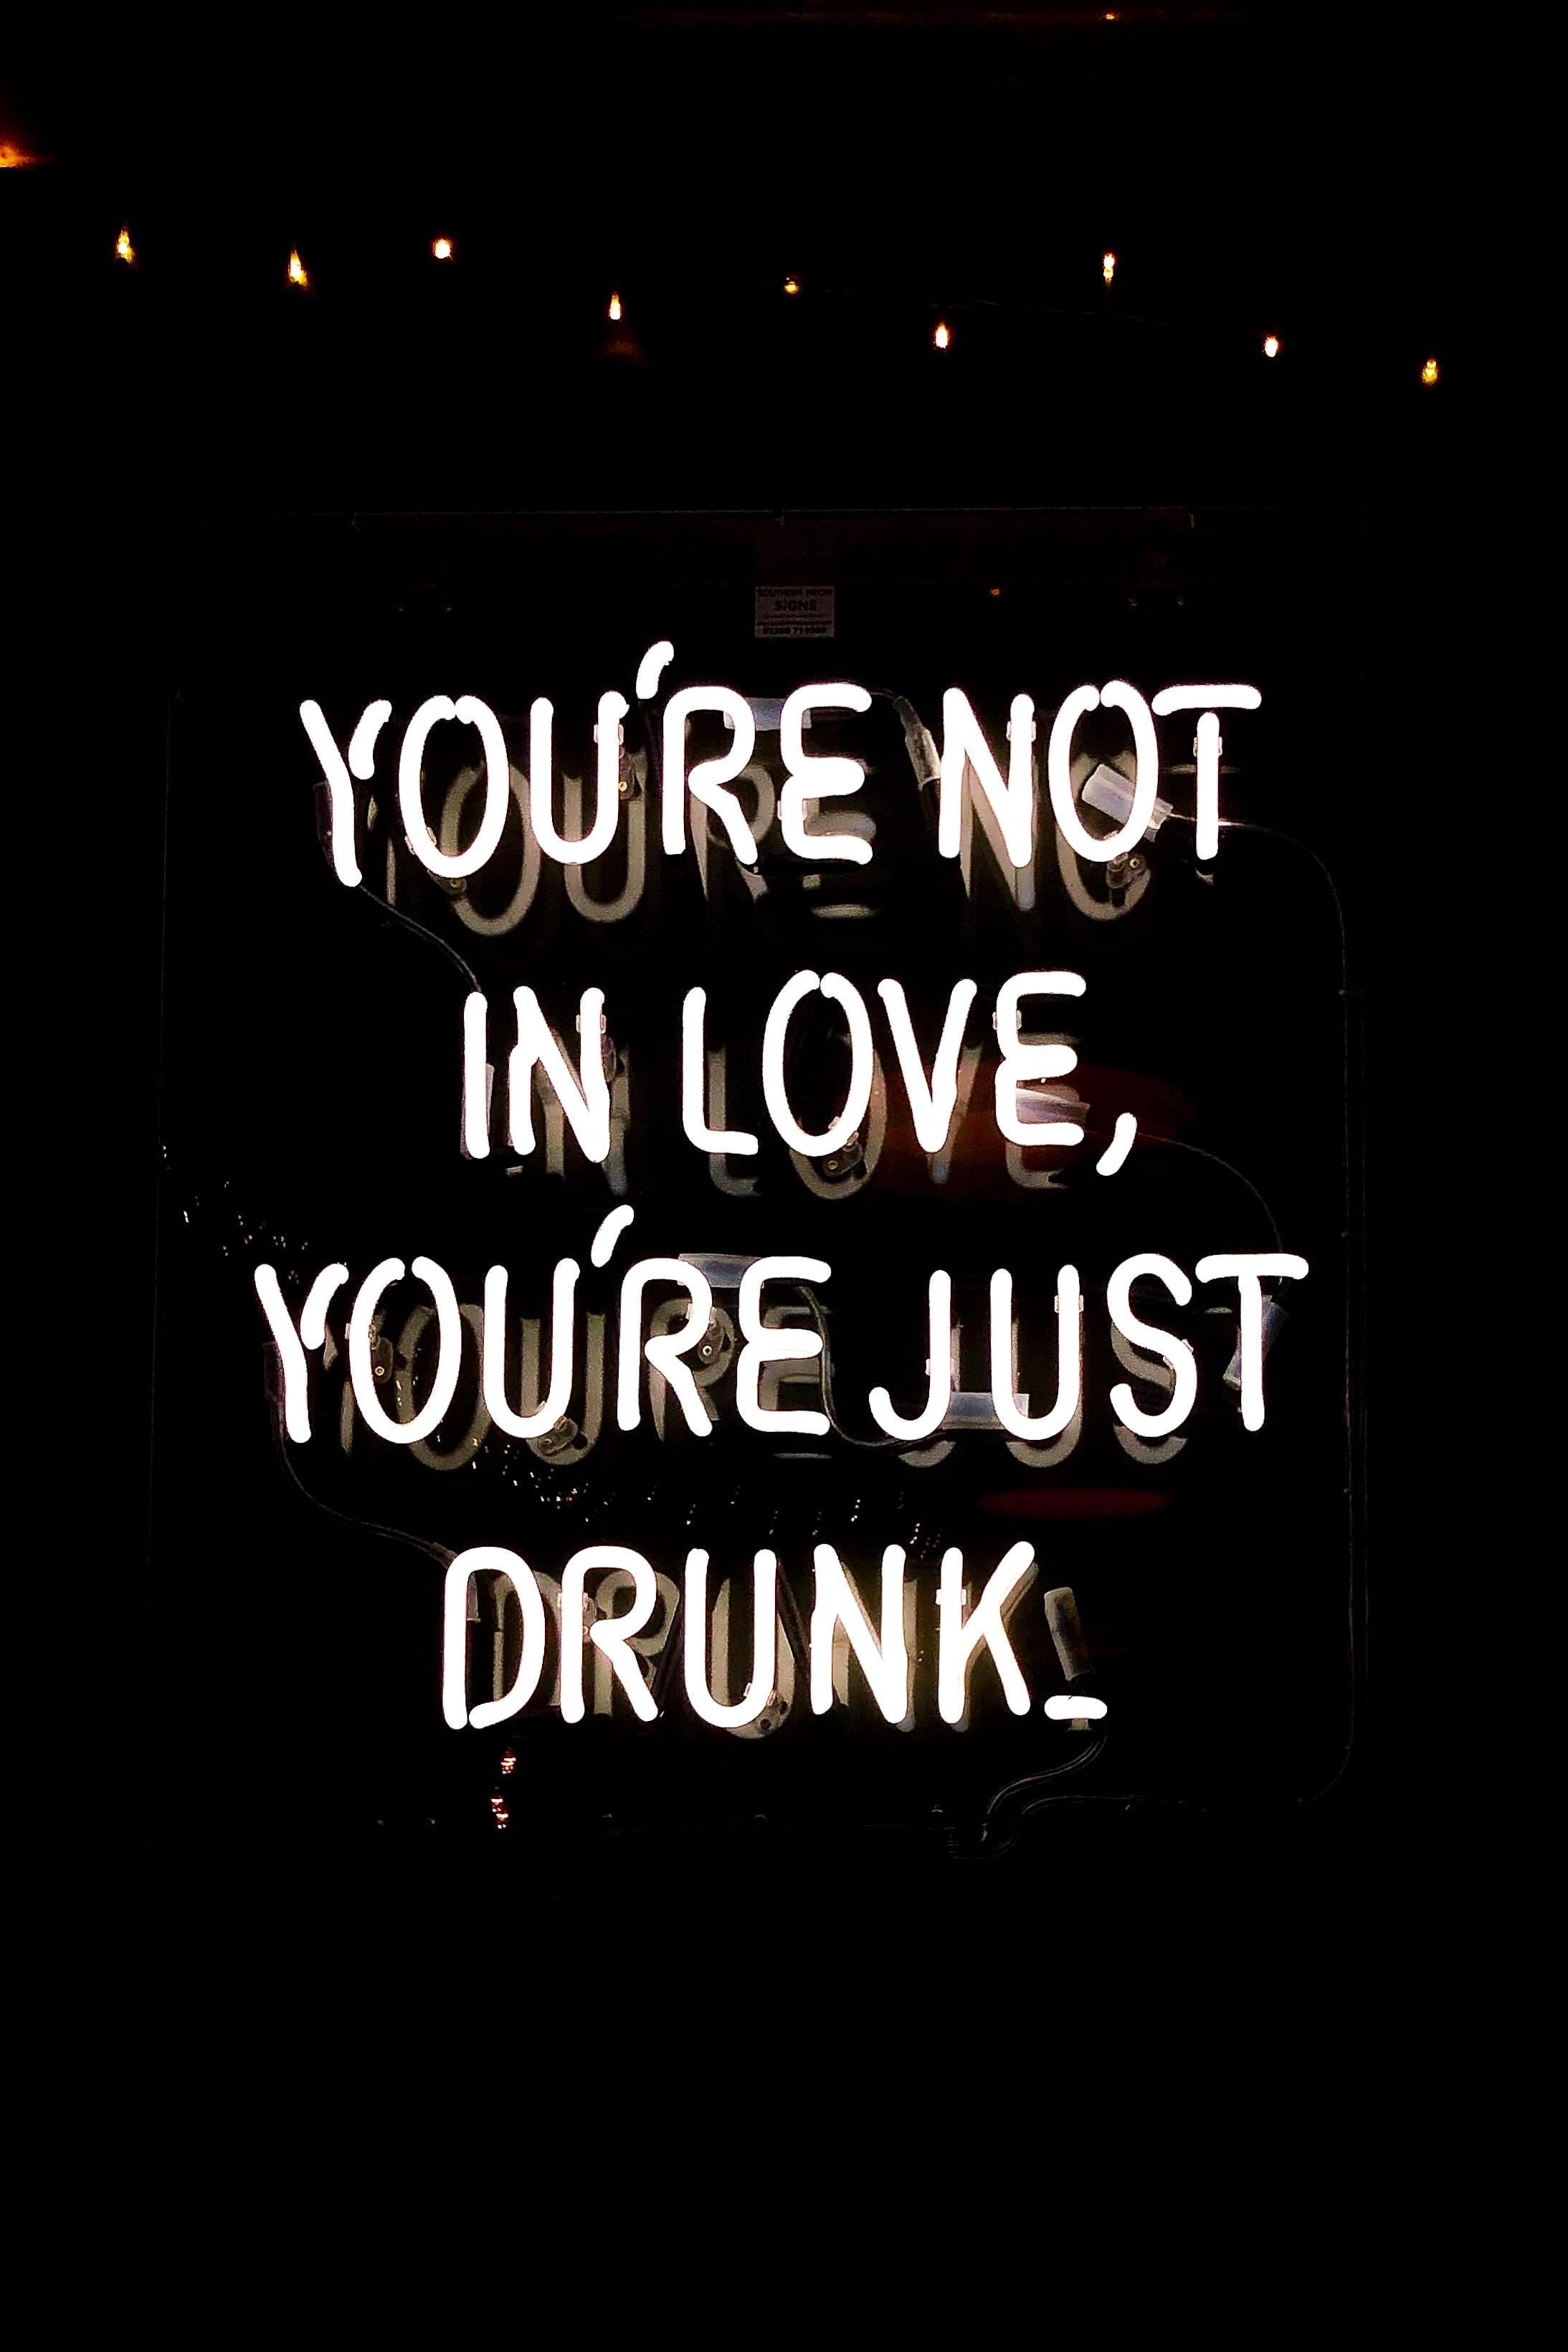 Neon sign saying You're not in love, you're just drunk; image by Rachael, via Unsplash.com.